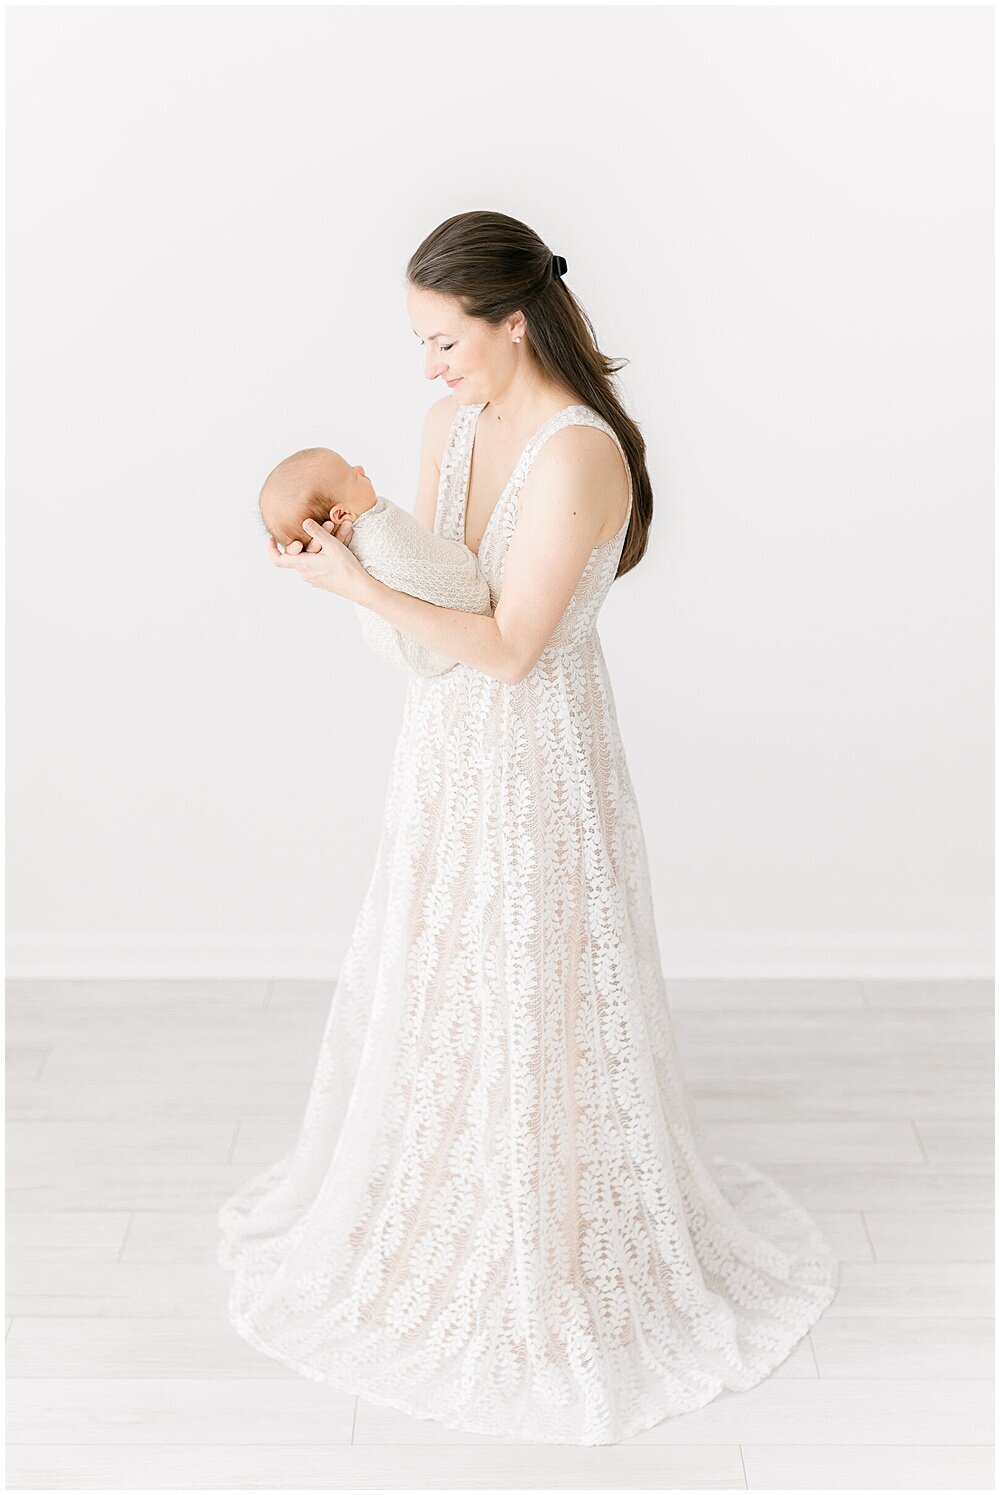 A mother wearing an elegant white and blush lace dress holding her swaddled newborn baby by washington dc newborn photographer